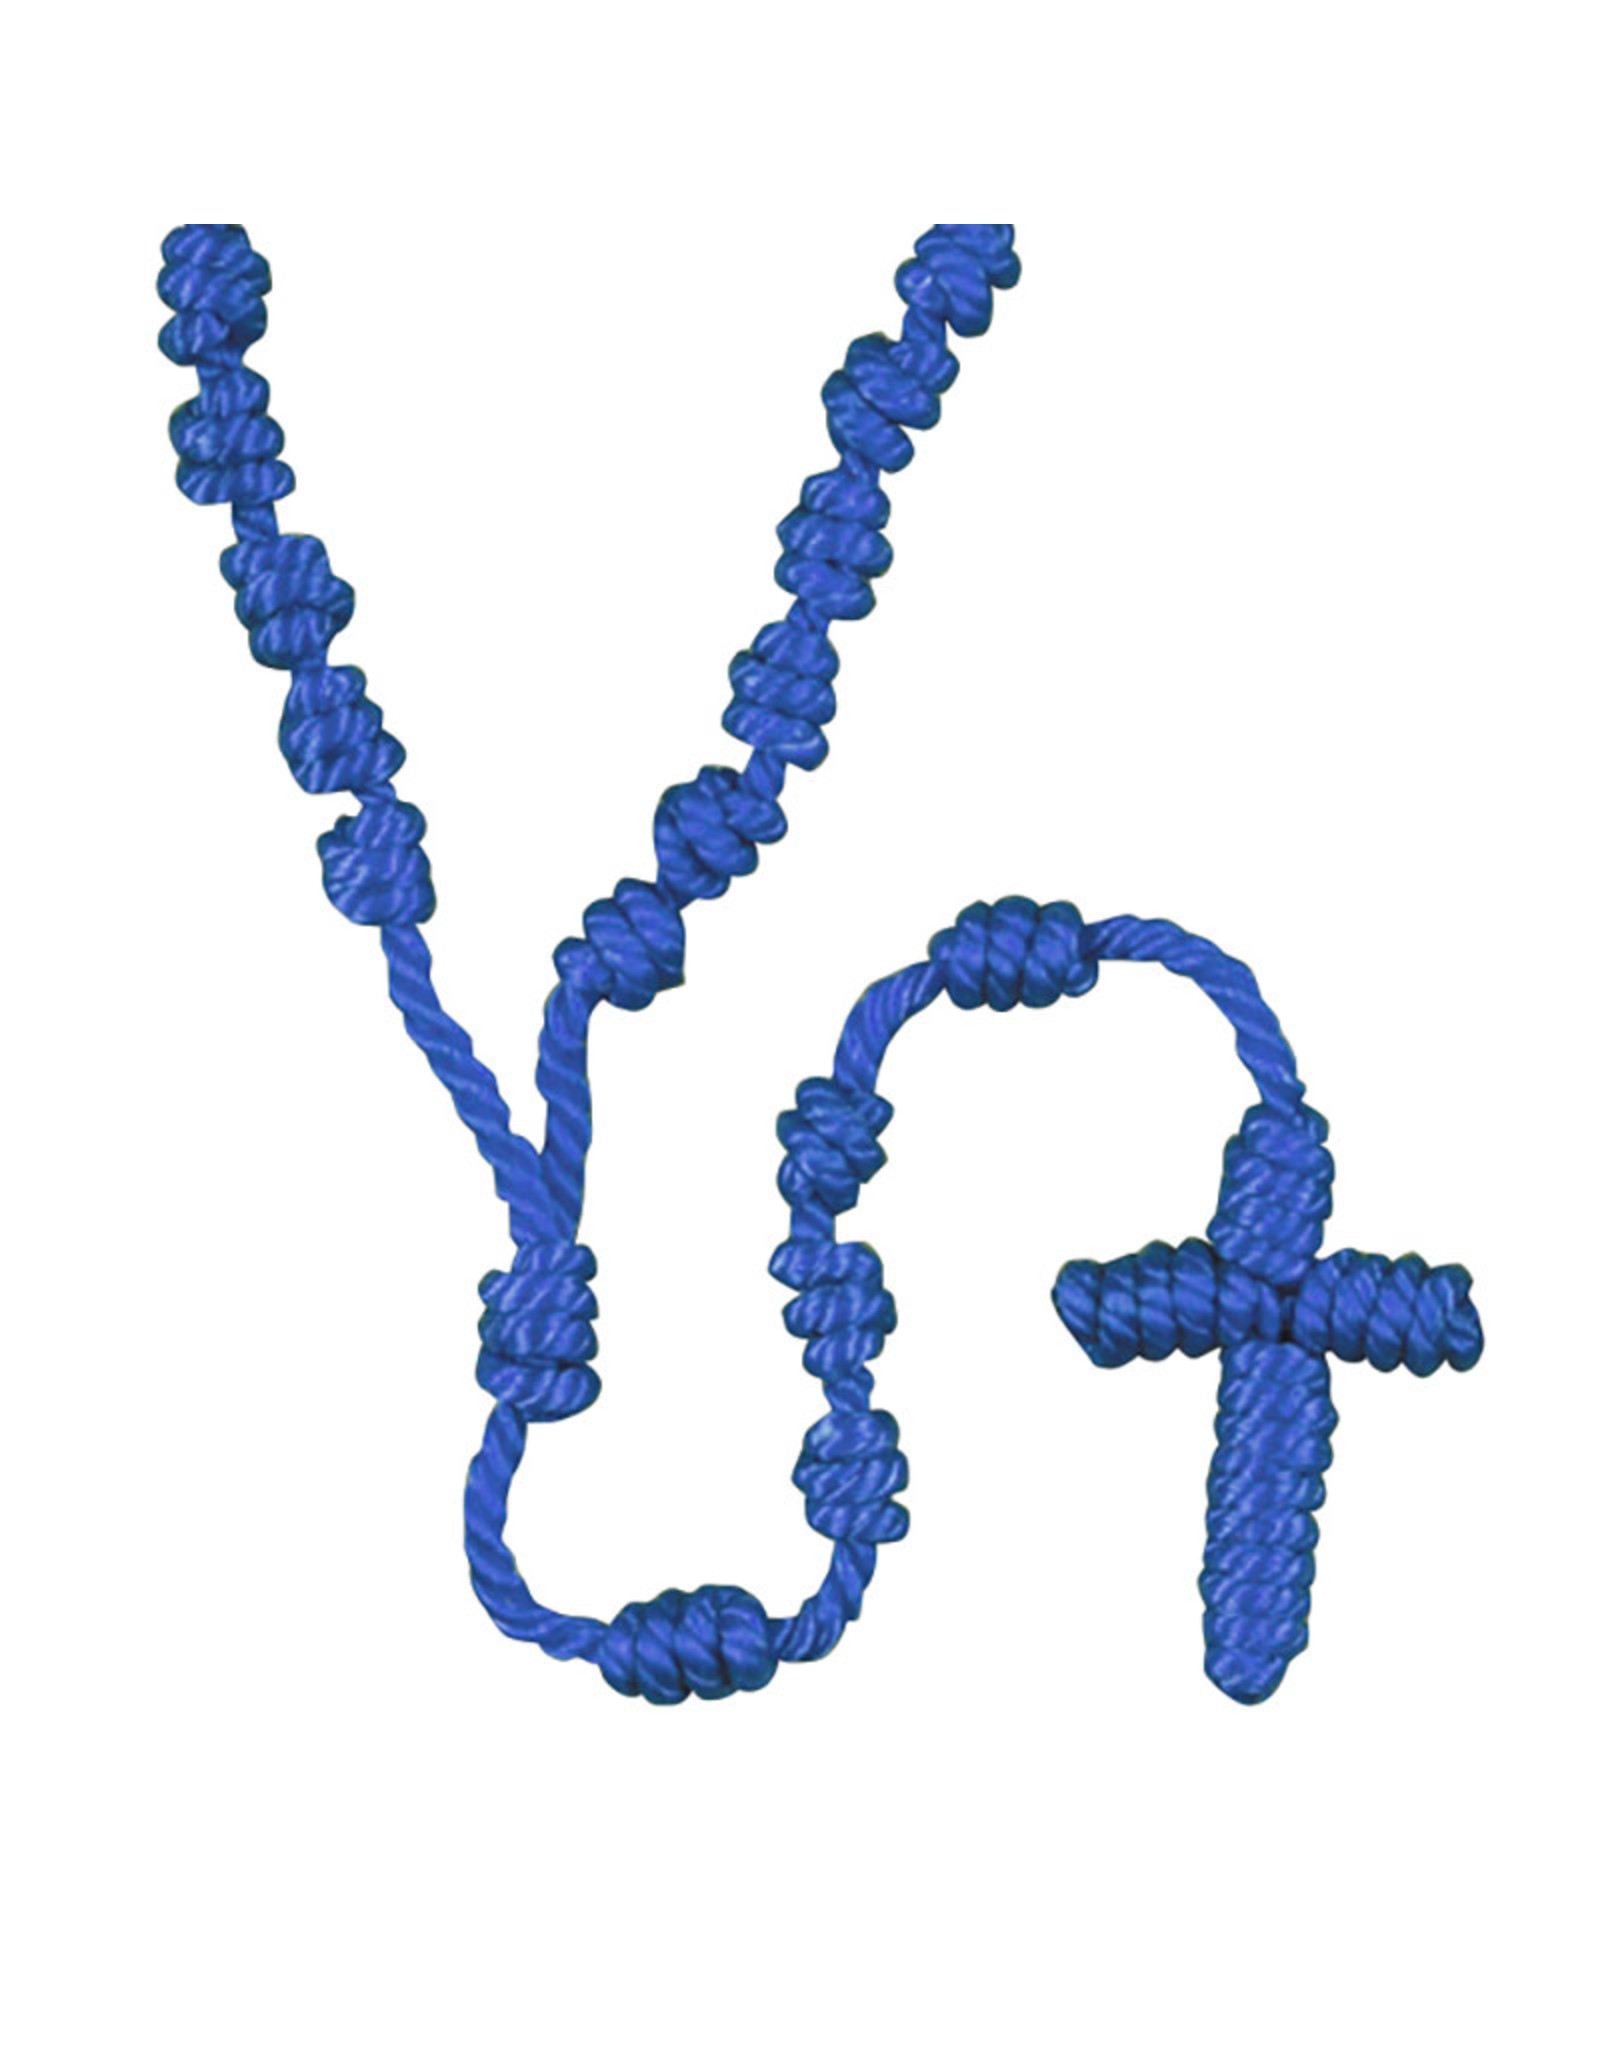 CBC - A Blue Knotted Cord Rosary